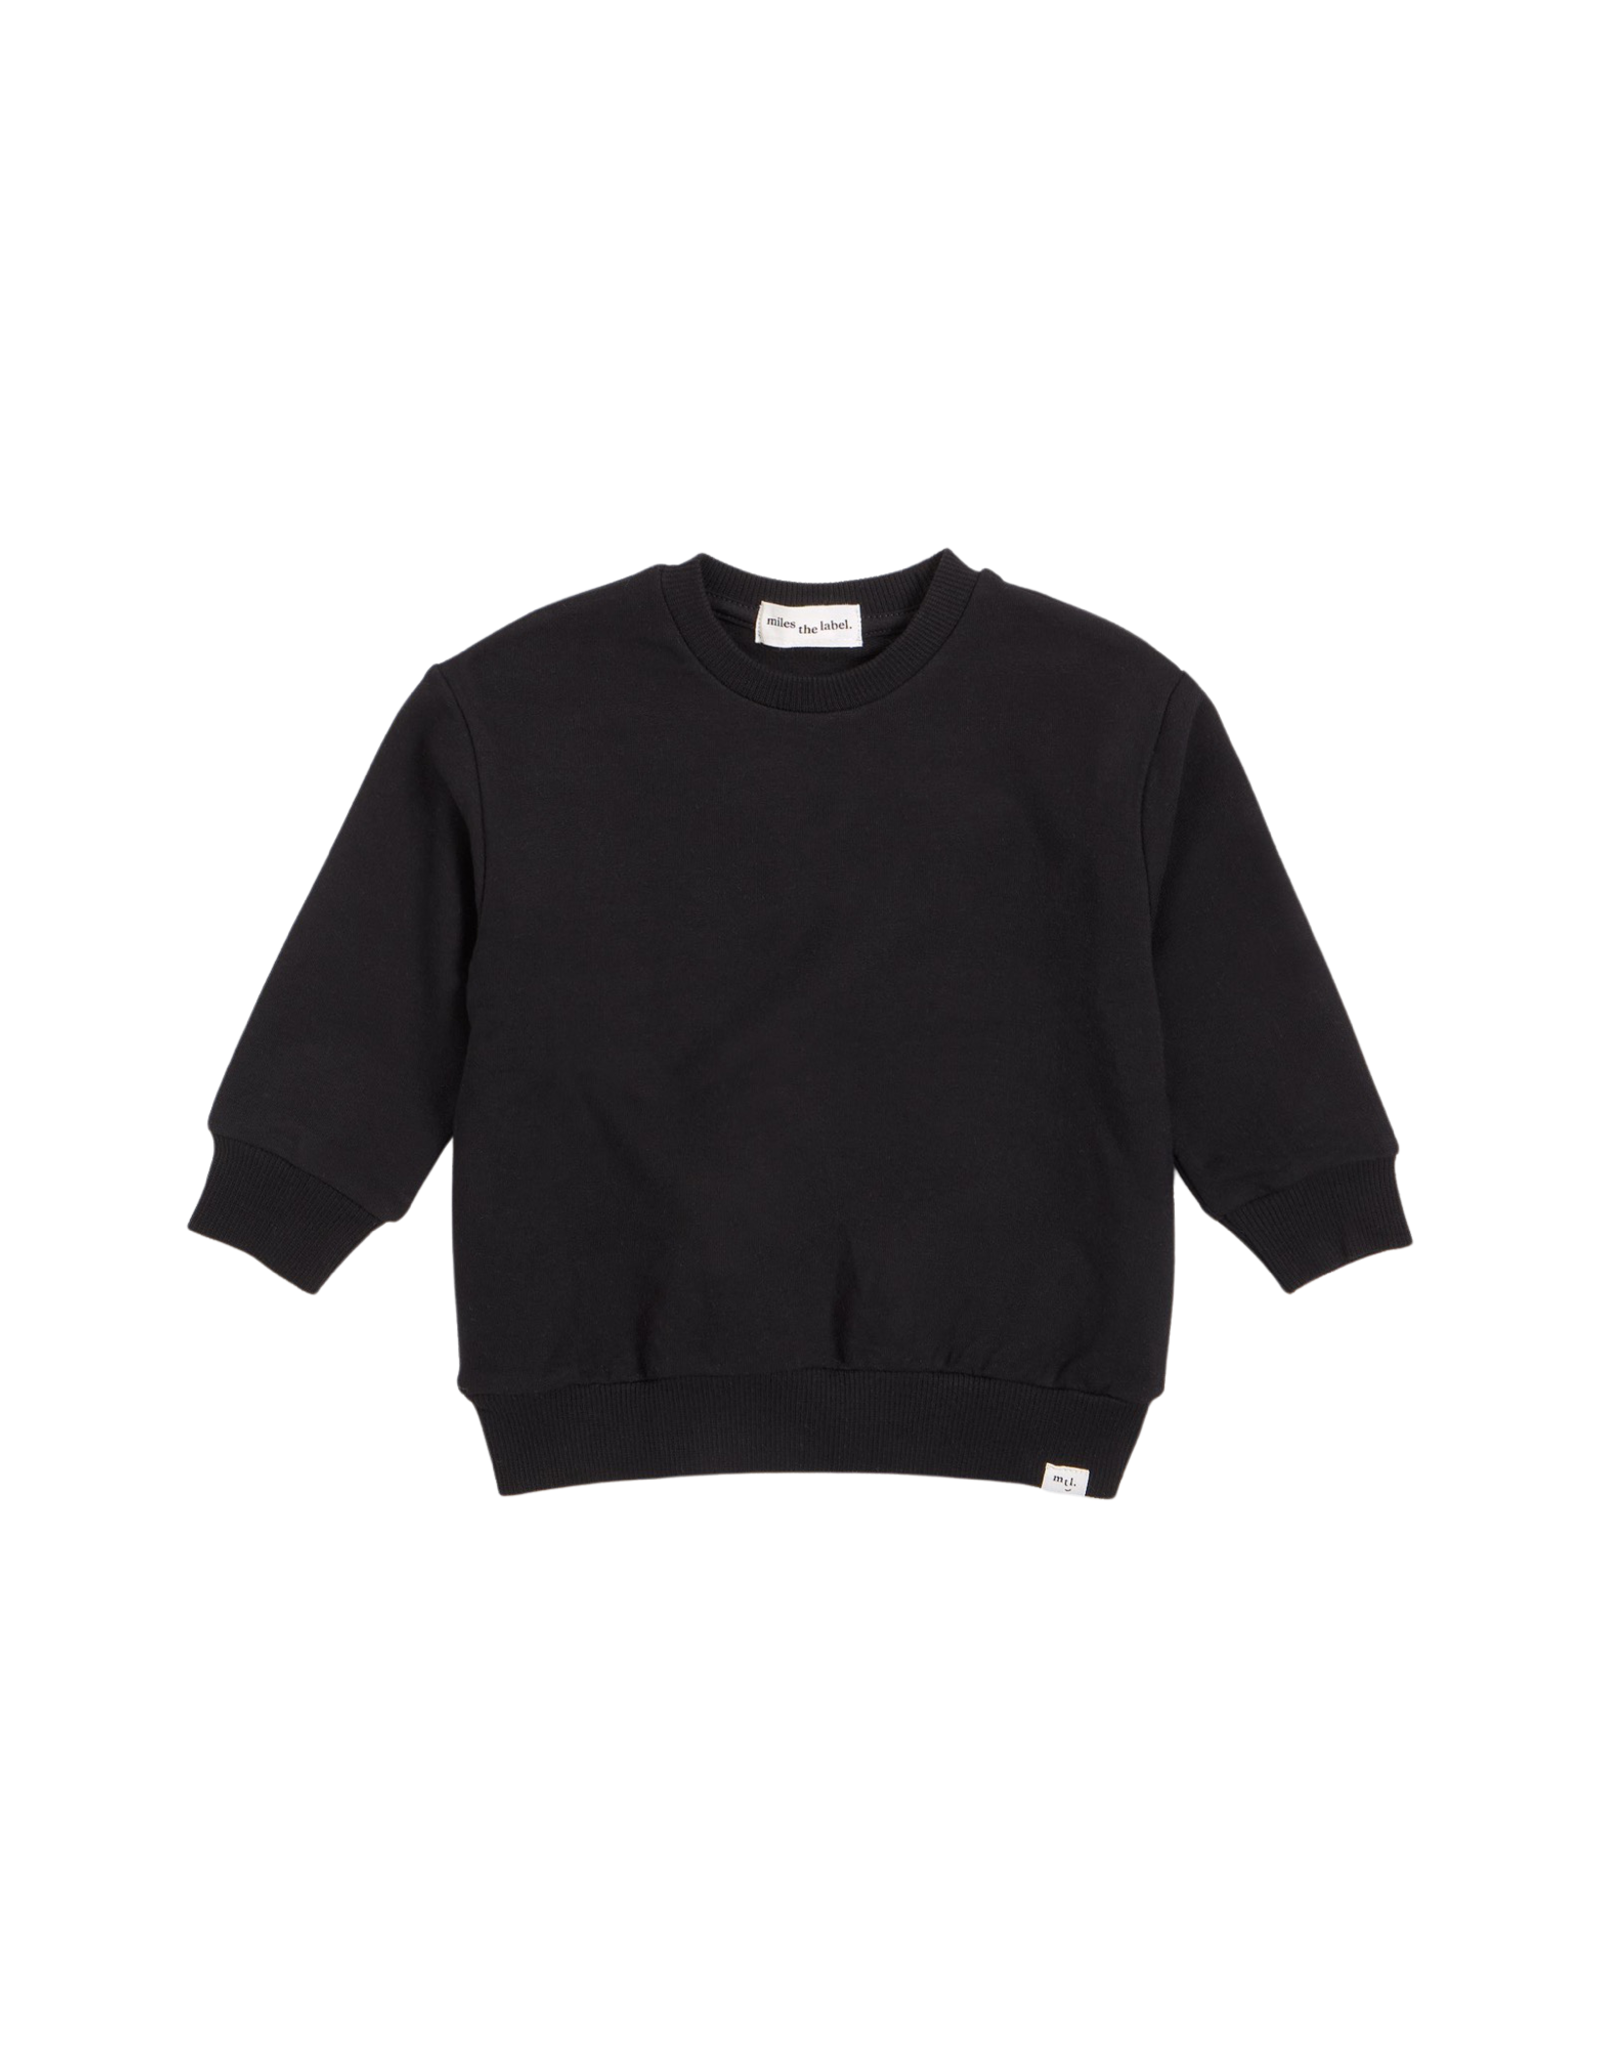 Miles The Label  "Miles Basic" Sweater